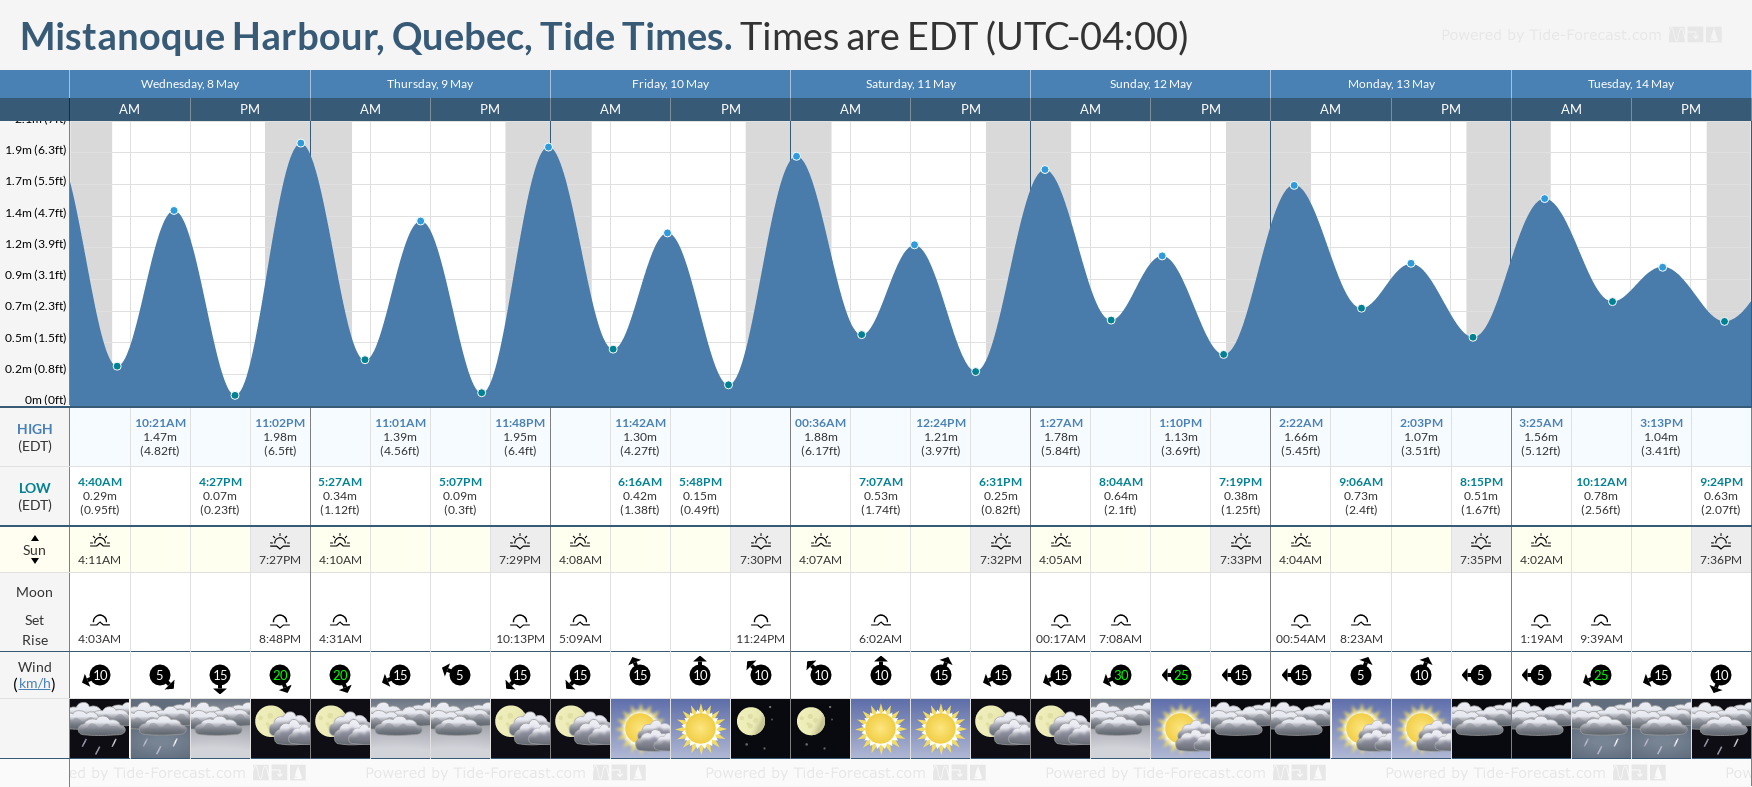 Mistanoque Harbour, Quebec Tide Chart including high and low tide times for the next 7 days